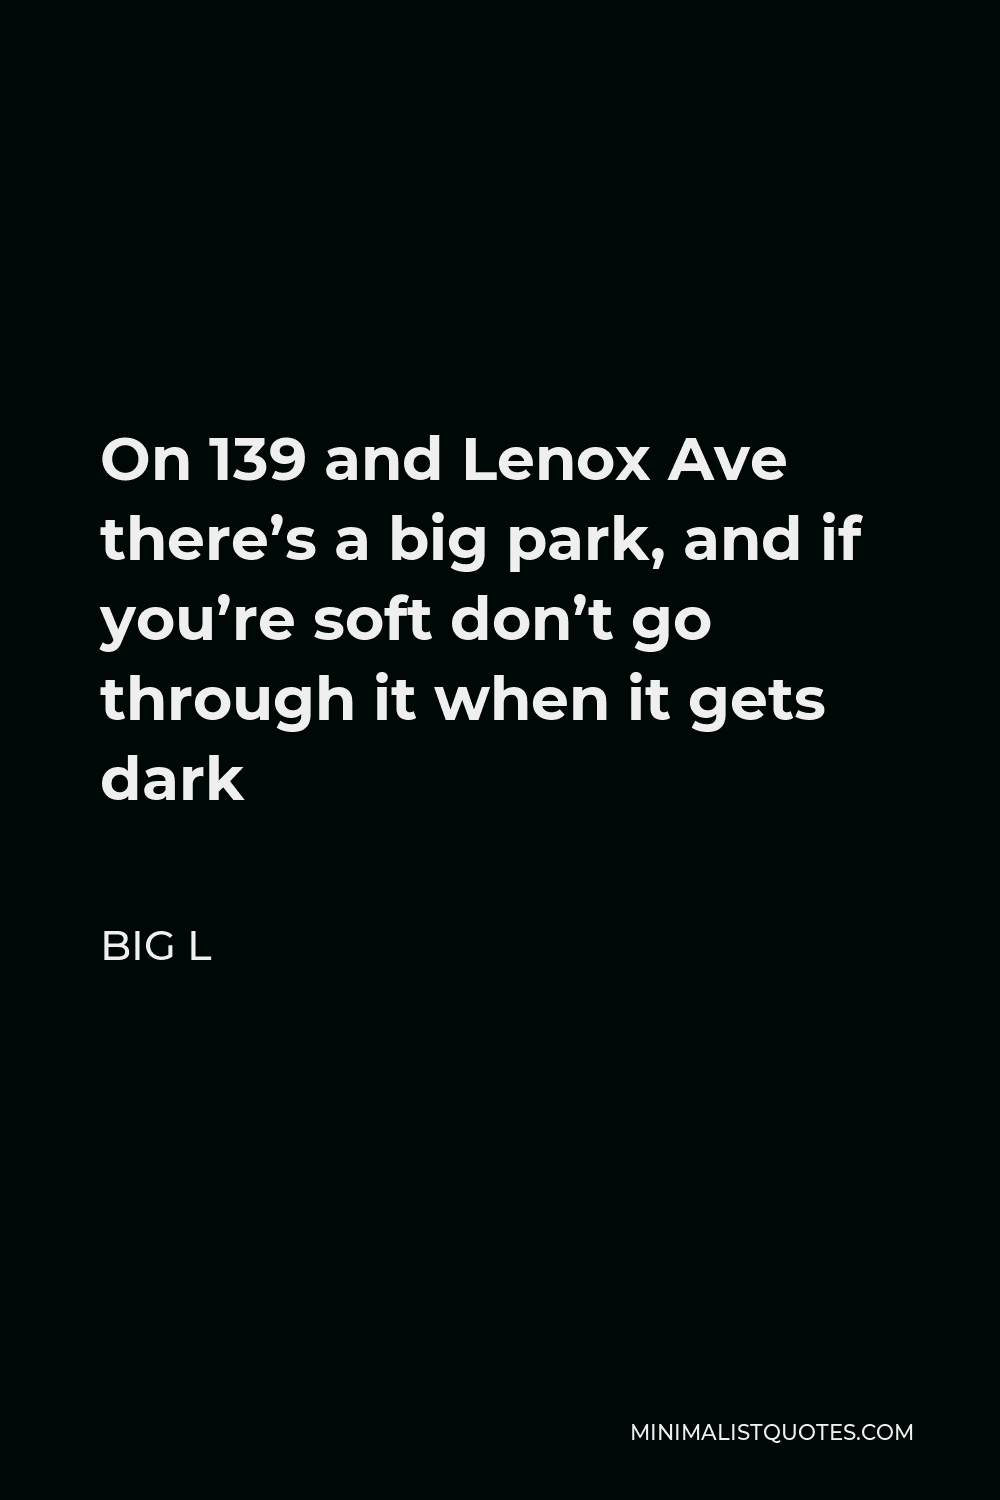 Big L Quote - On 139 and Lenox Ave there’s a big park, and if you’re soft don’t go through it when it gets dark